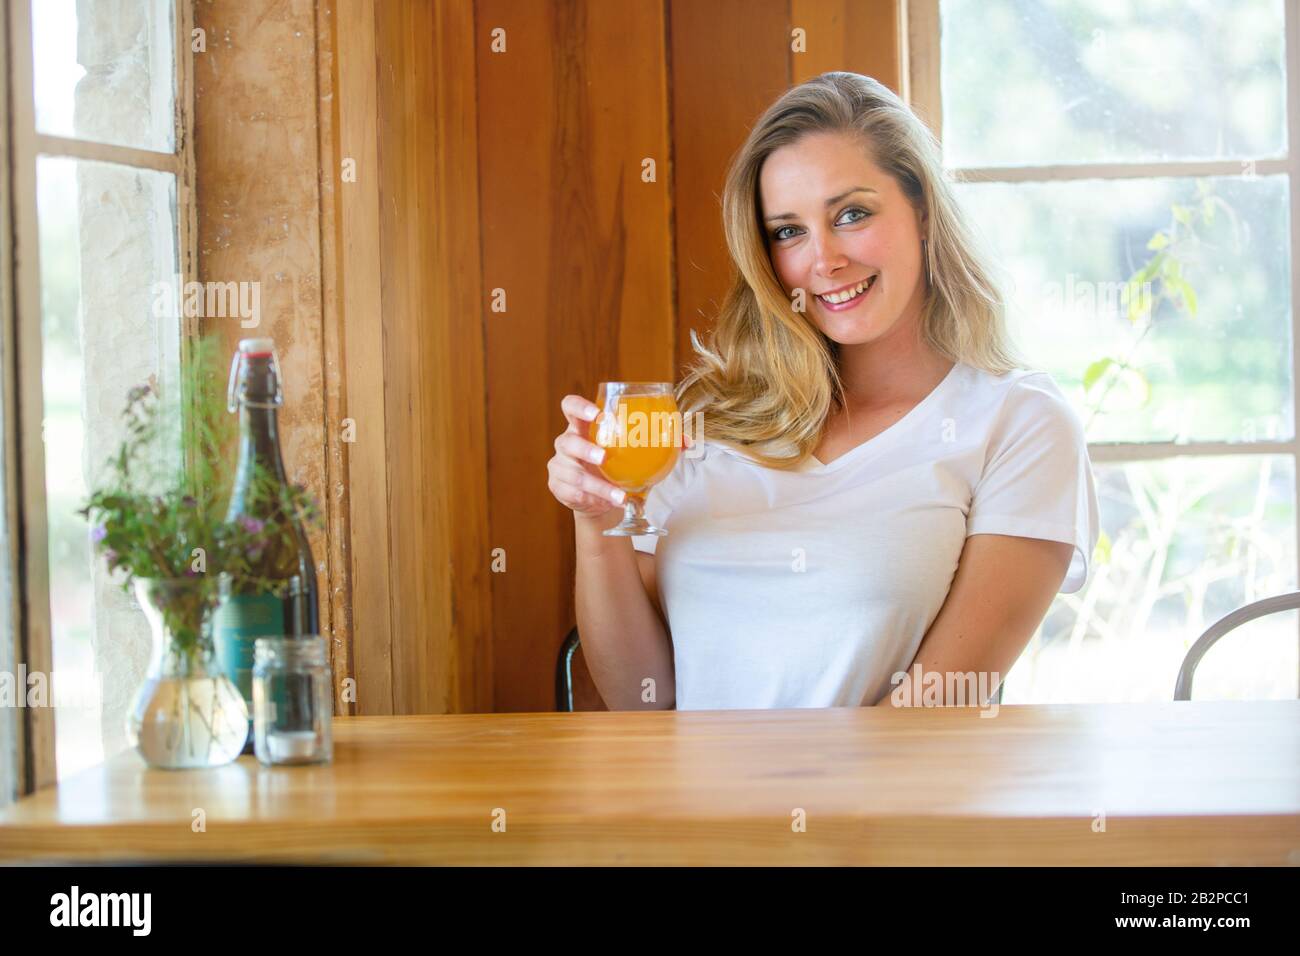 A person enjoying local brewery fresh craft beer in a tulip glass, gorgeous wooden background with window light Stock Photo